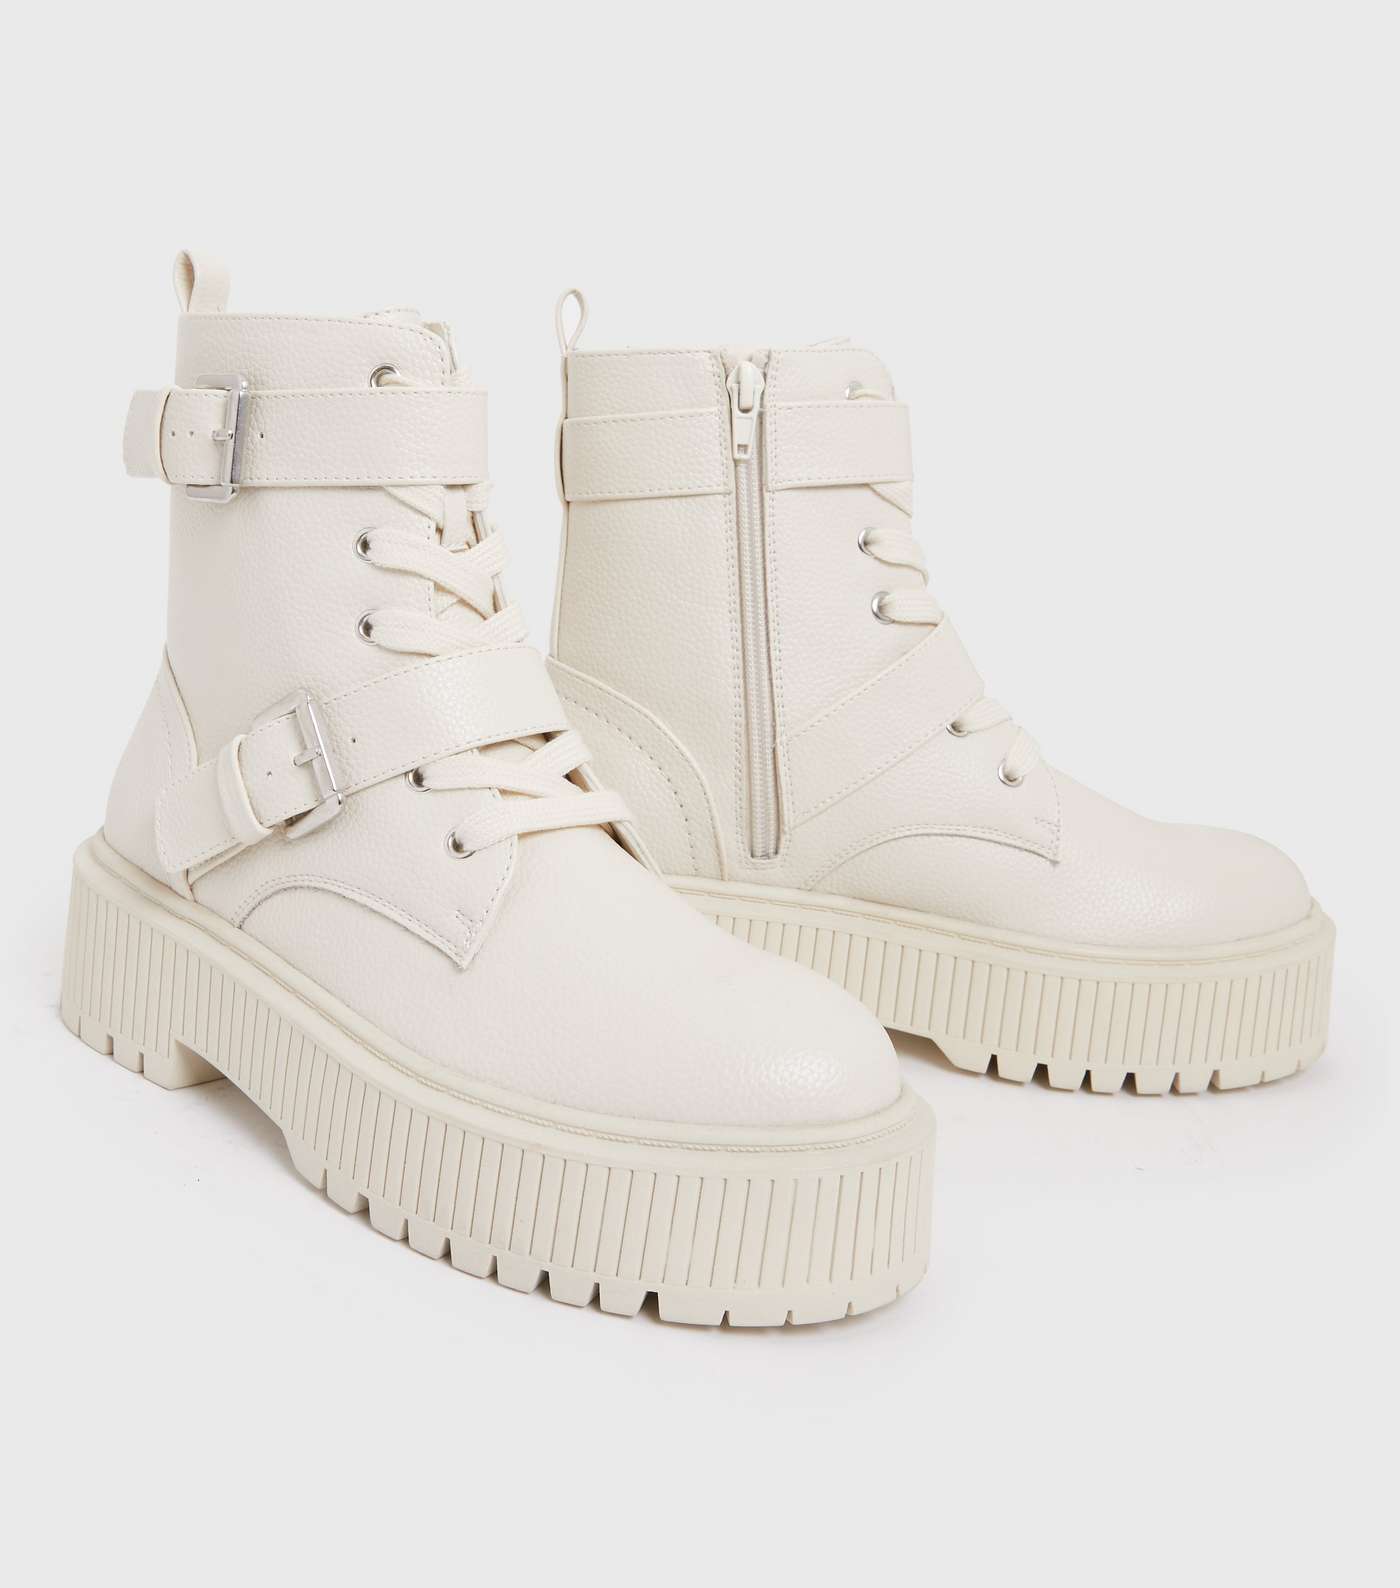 Off White Buckle Lace Up Chunky Flatform Boots Image 3